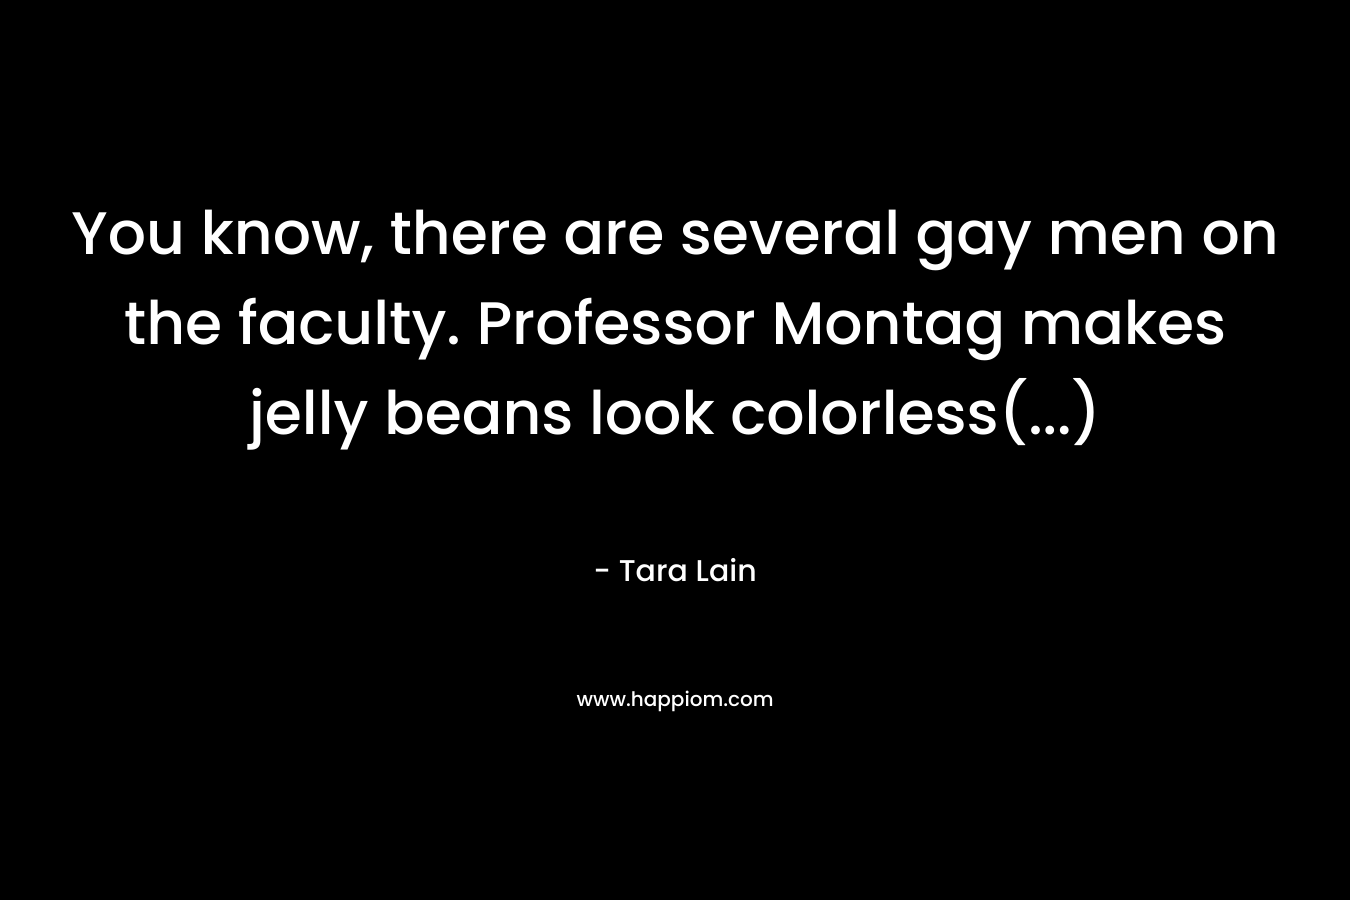 You know, there are several gay men on the faculty. Professor Montag makes jelly beans look colorless(...)